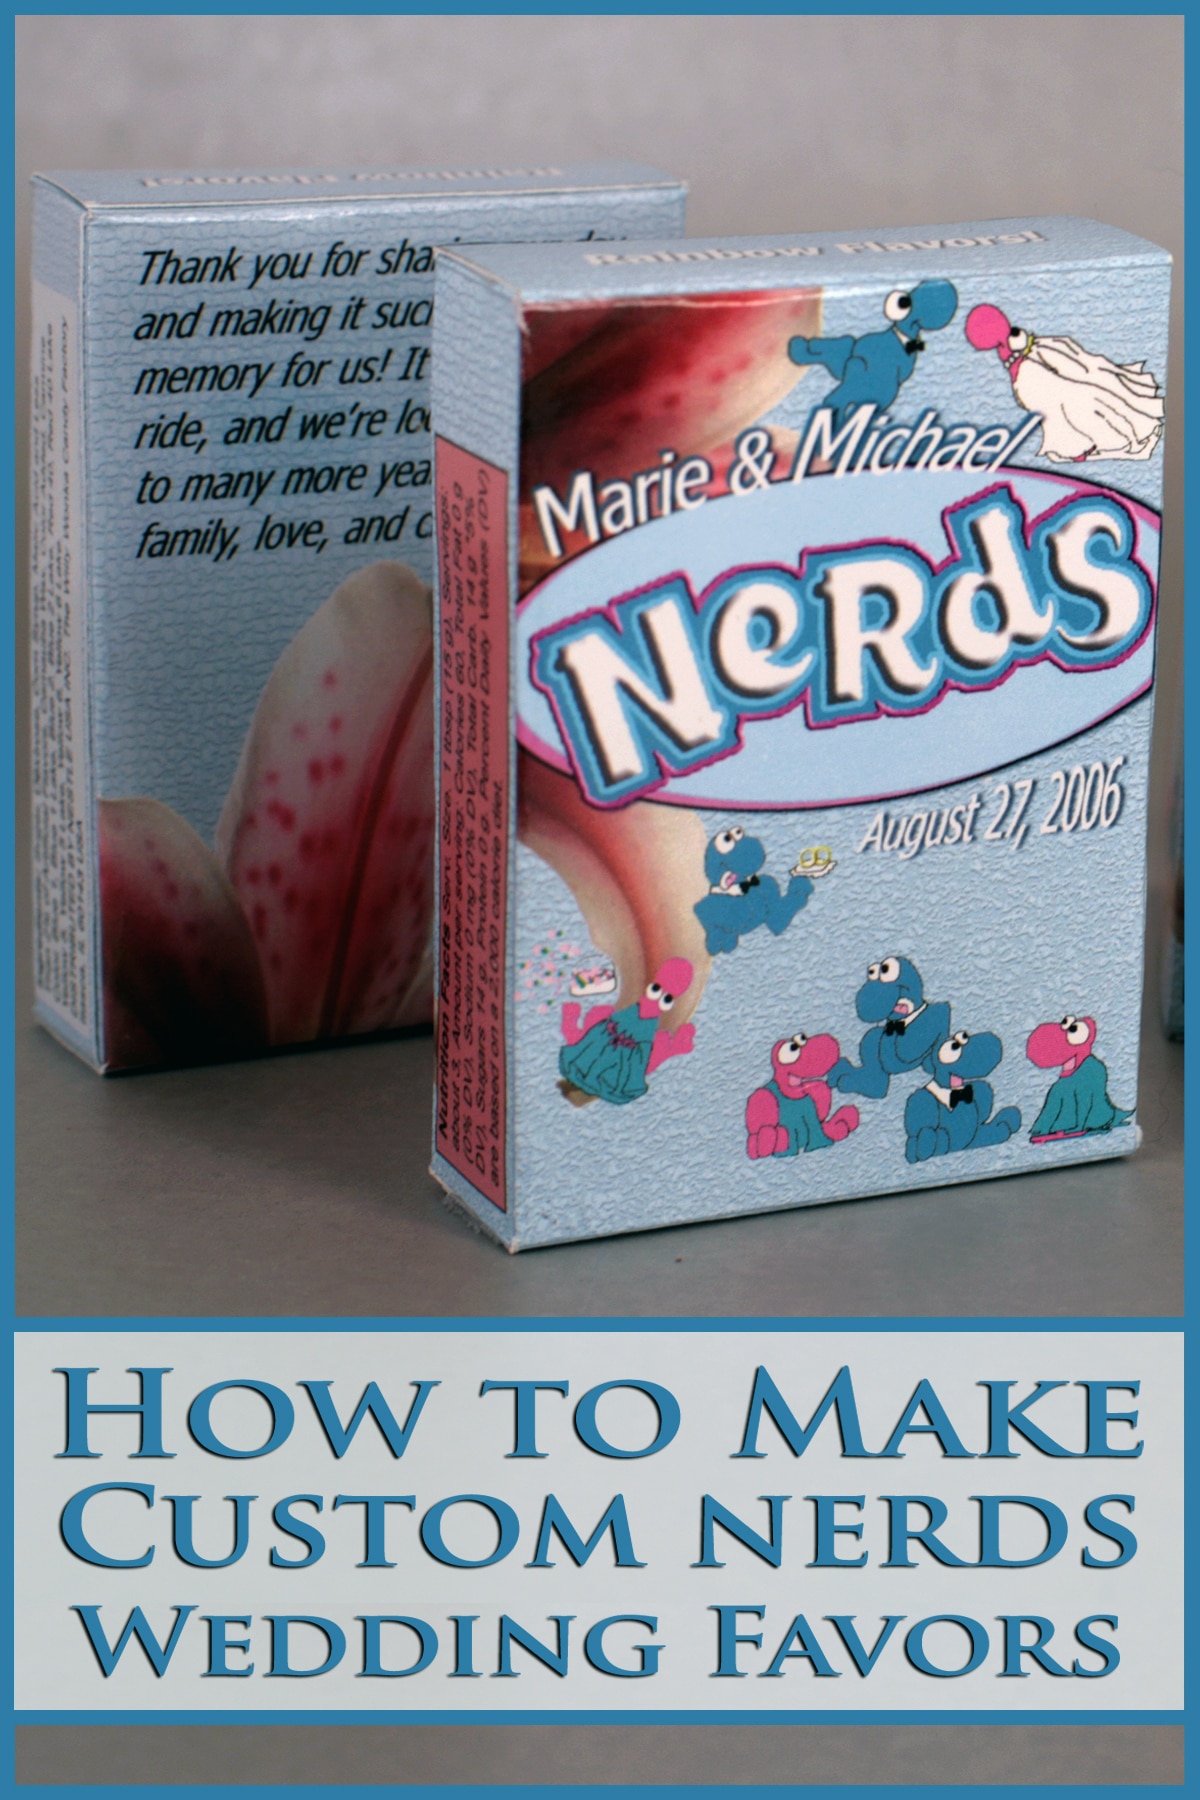 Several customized Nerds Candy Wedding Favor boxes.  They're light blue, with blue and pink Nerds characters, a bride and groom, and stargazer lilies.  Blue text overlay says how to make custom nerds wedding favors.